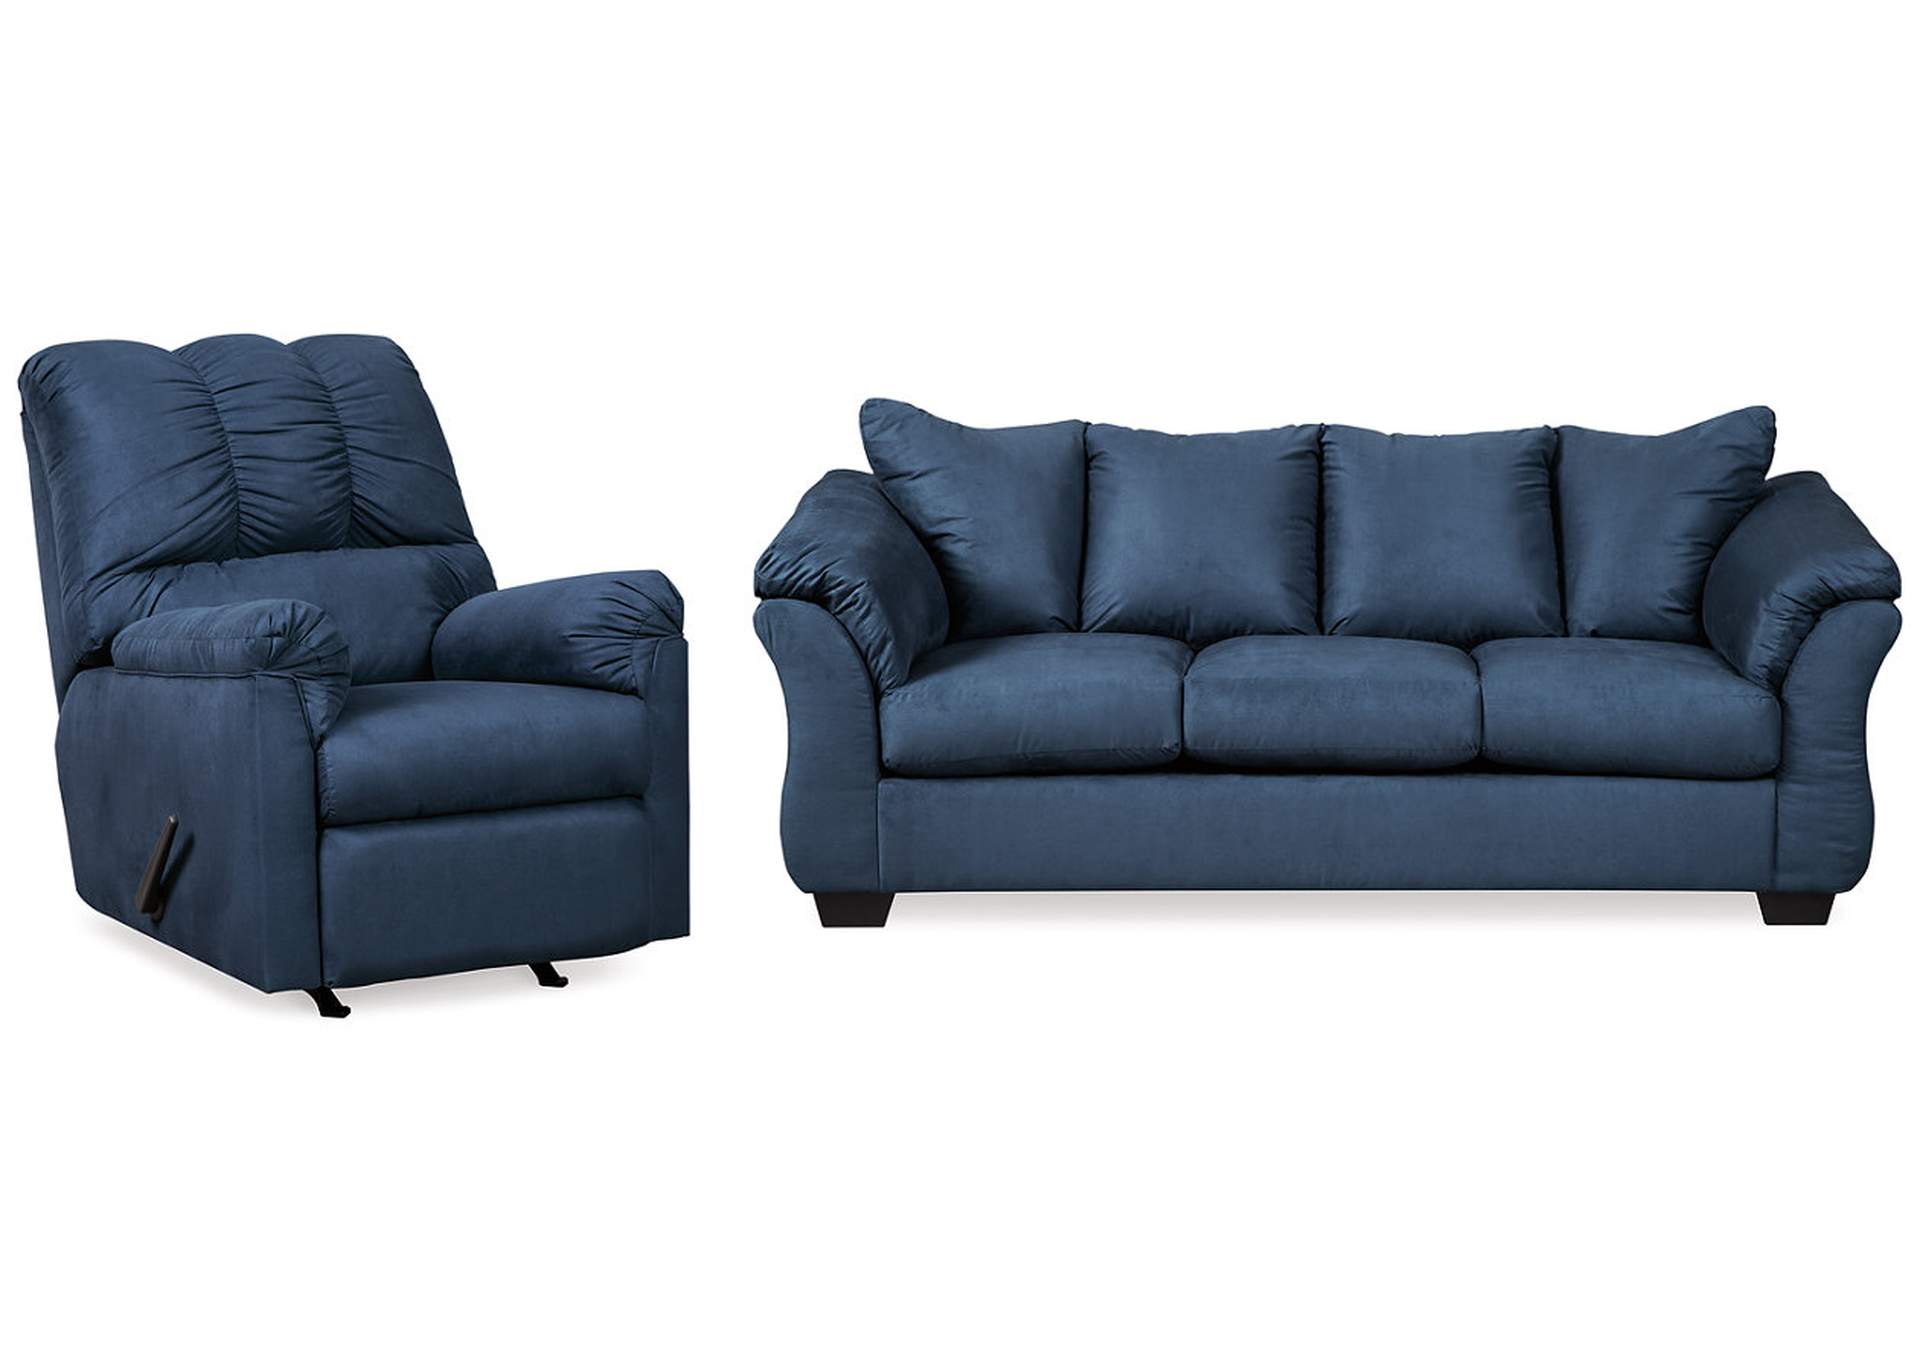 Darcy Sofa and Recliner,Signature Design By Ashley